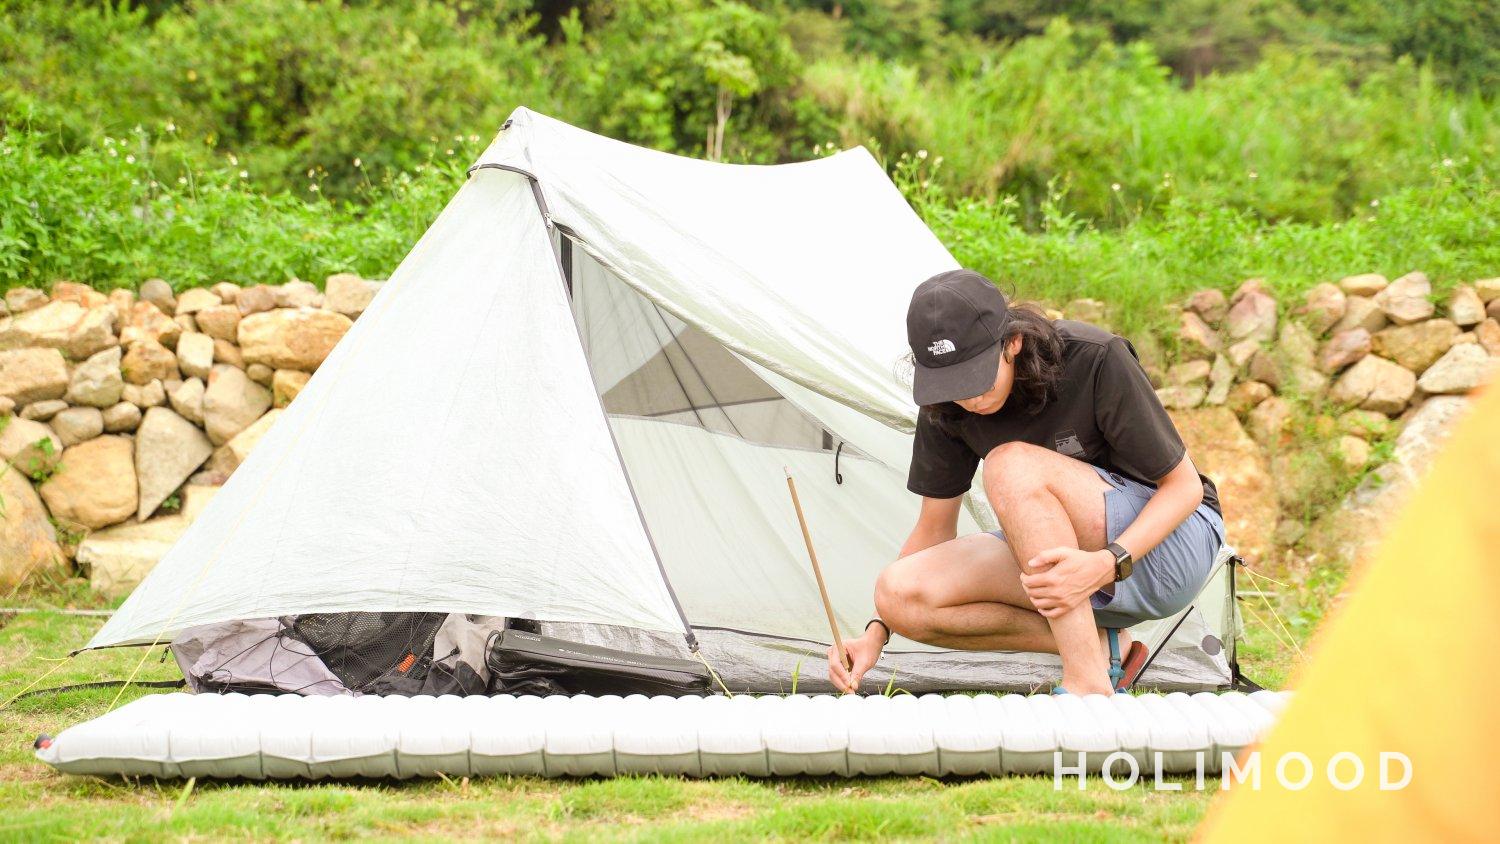 Nomad Terrace - Dome & Bell Tent & Glamping Tent 【Brand-New Campground】Nomad Terrace Camping Area - Zone C Teak Corner (2-4 pax) 6